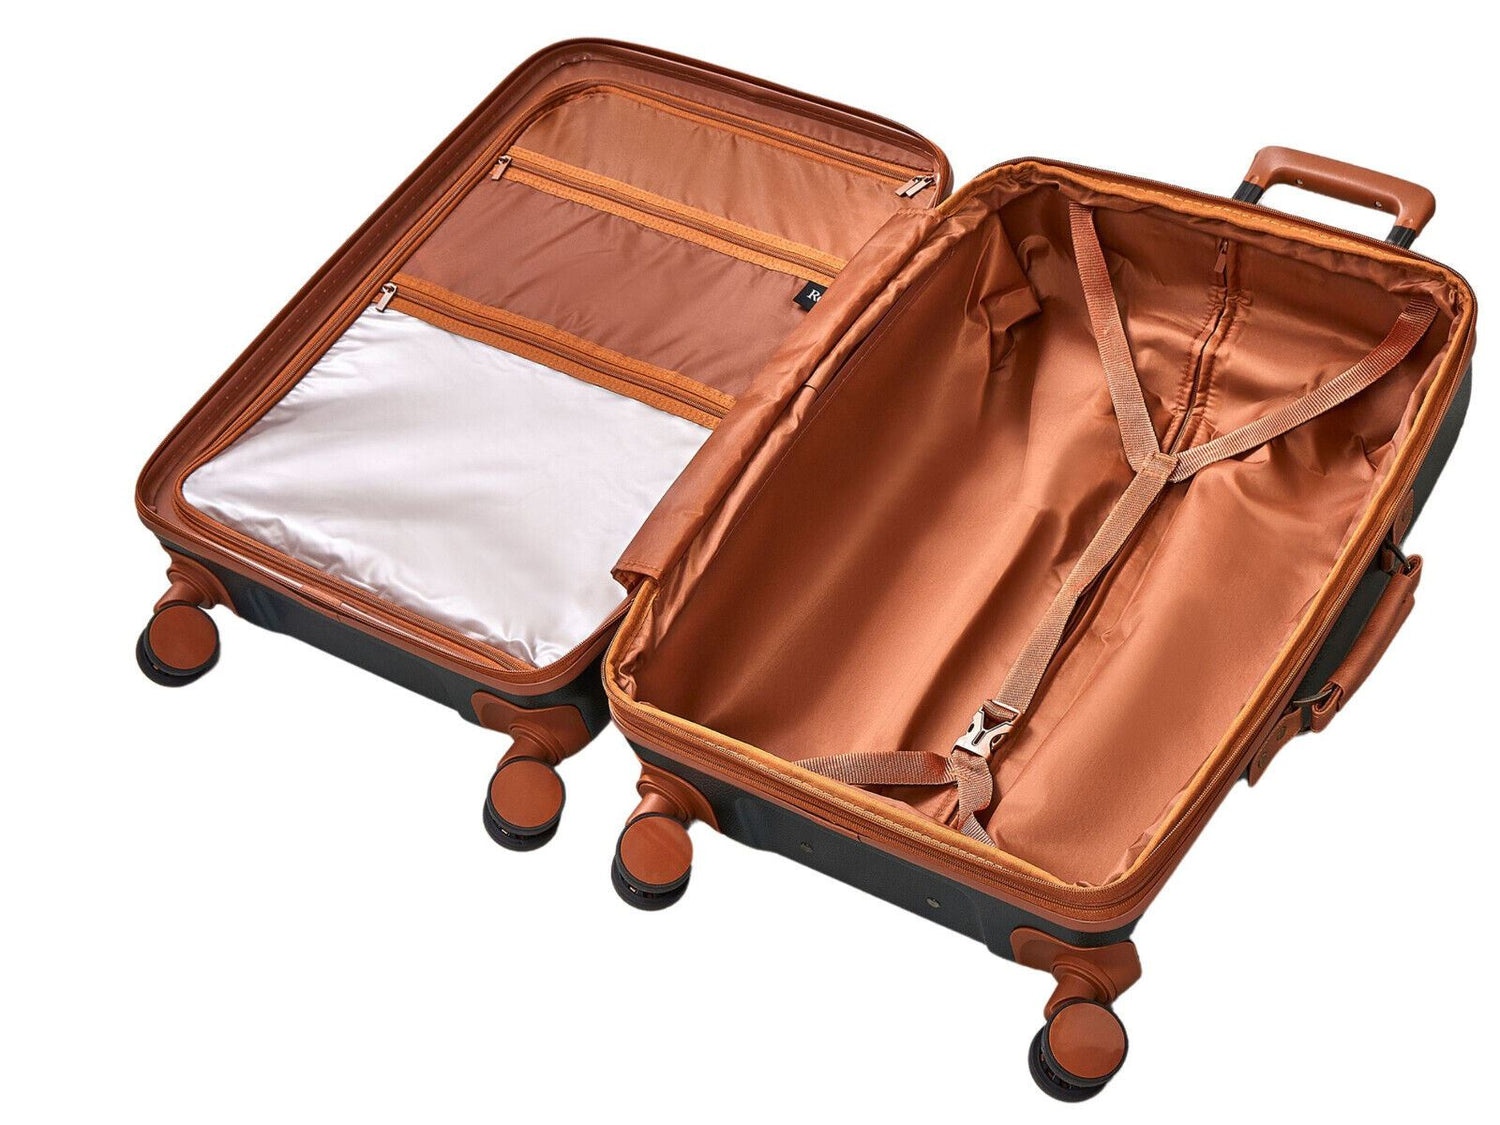 Hard Shell Classic Suitcase 4 Wheel Cabin Luggage Trolley Travel Bag